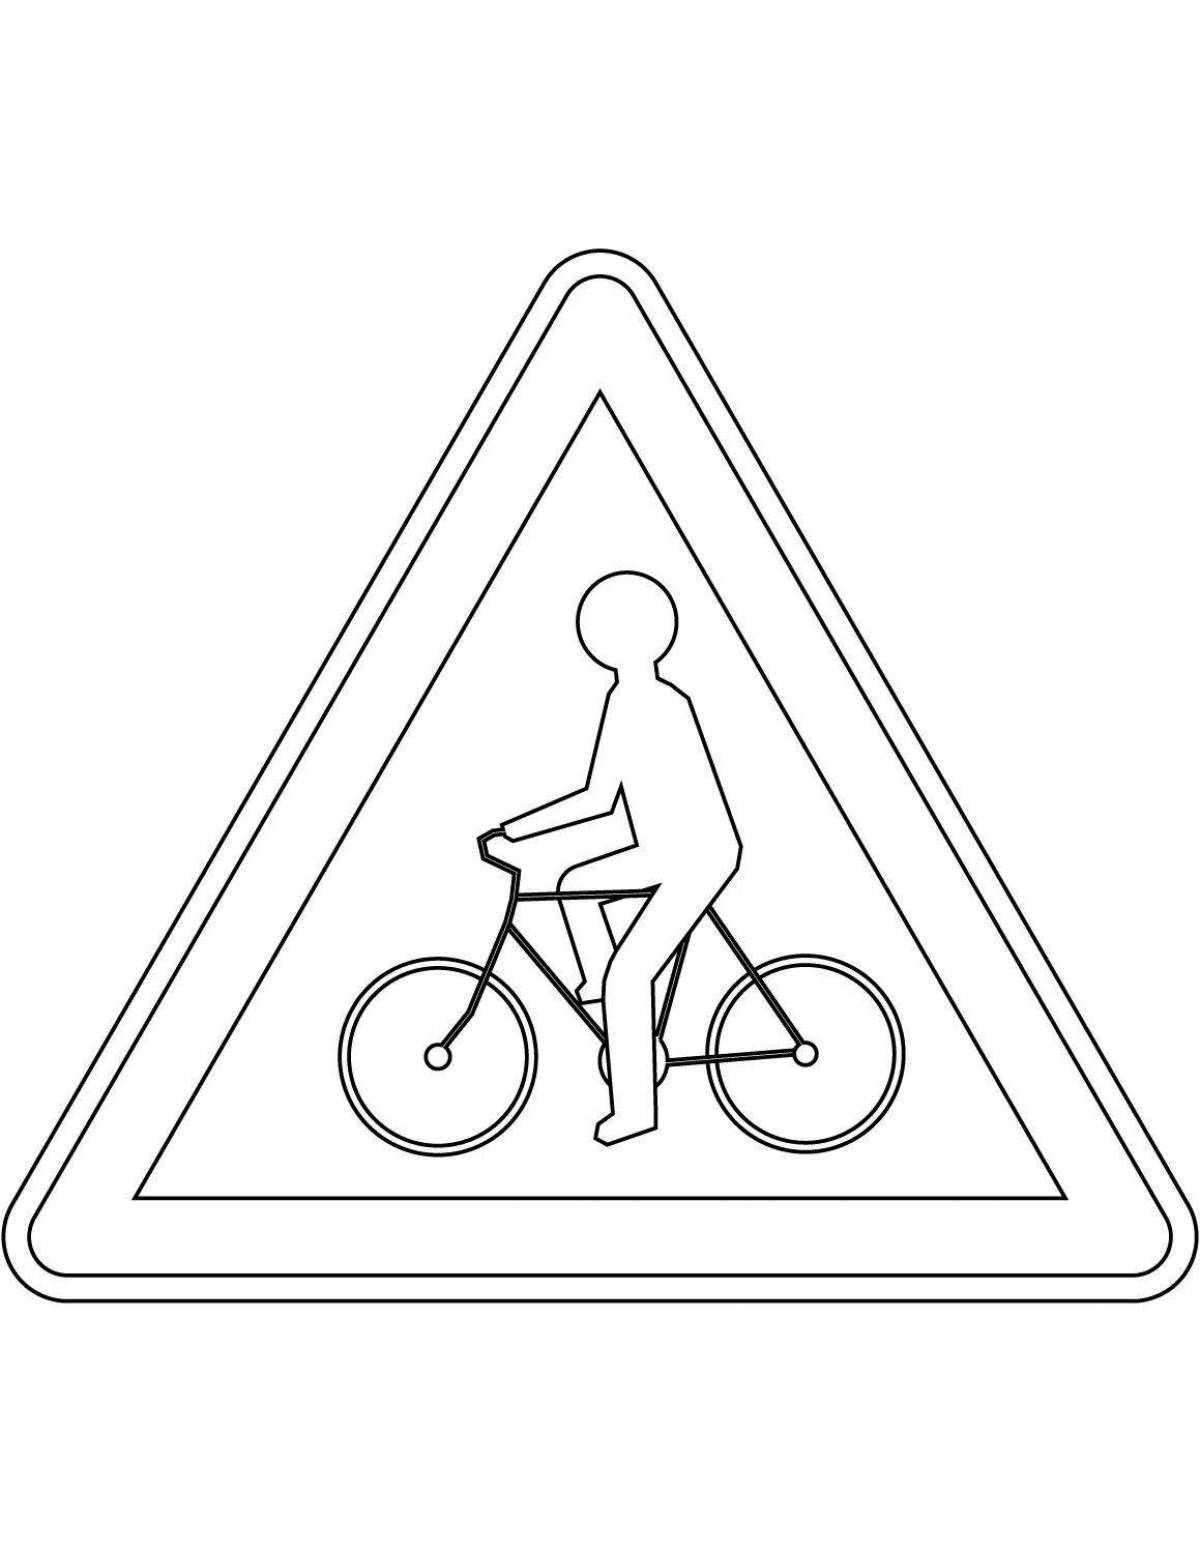 Playful no bike coloring page